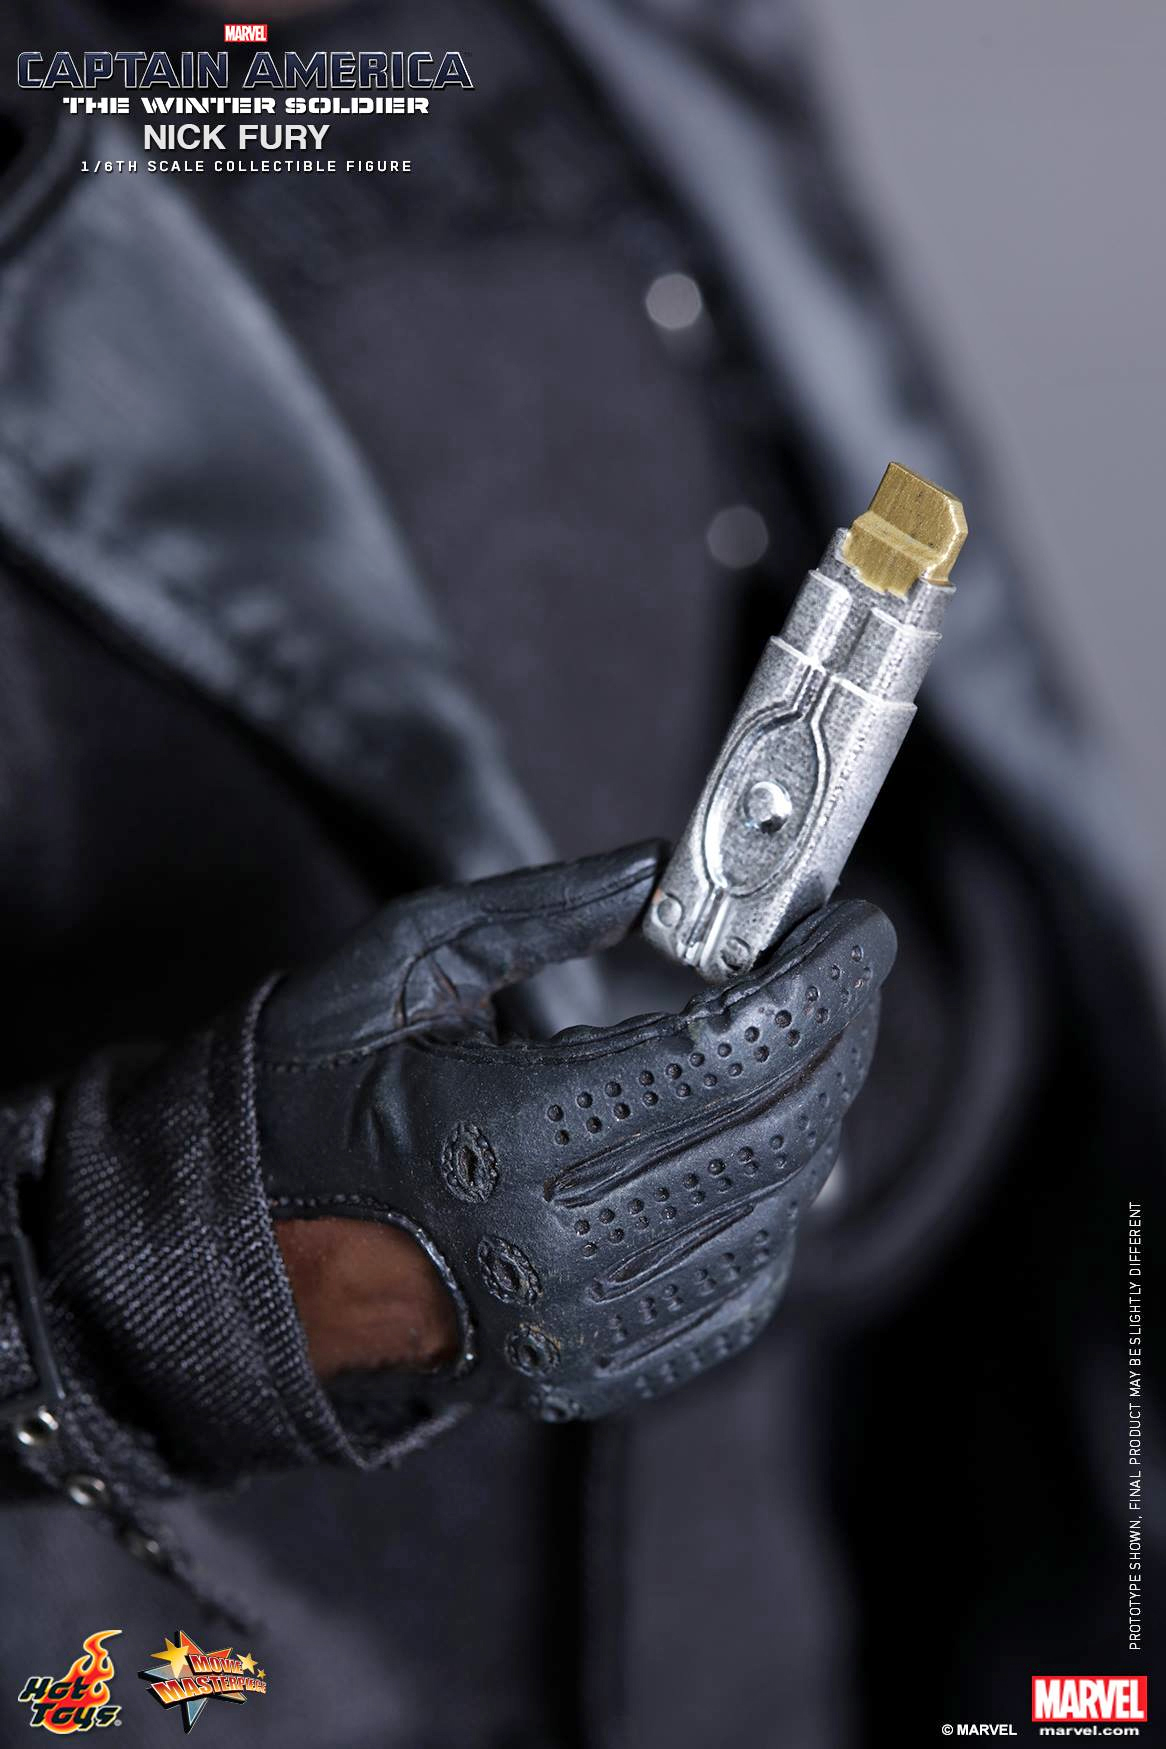 Hot Toys’ Sixth-Scale Nick Fury Is One Bad Mother Figure